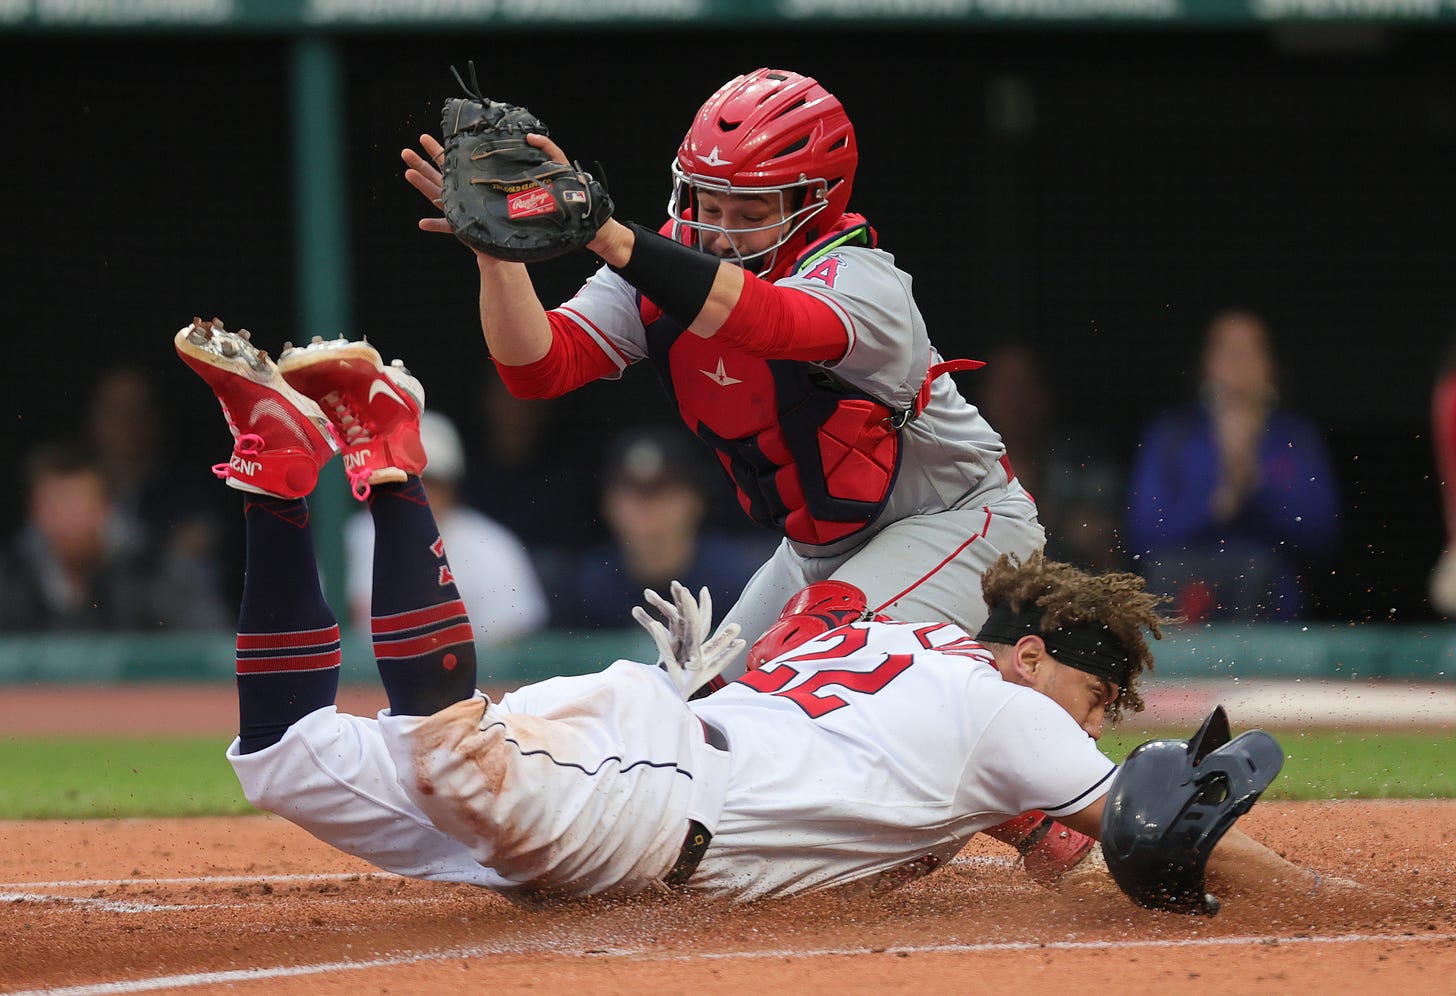 Cleveland Guardians first baseman Josh Naylor slides safely to home plate for a score as Los Angeles Angels catcher Matt Thaiss fields the throw in the second inning, May 12, 2023, at Progressive Field.